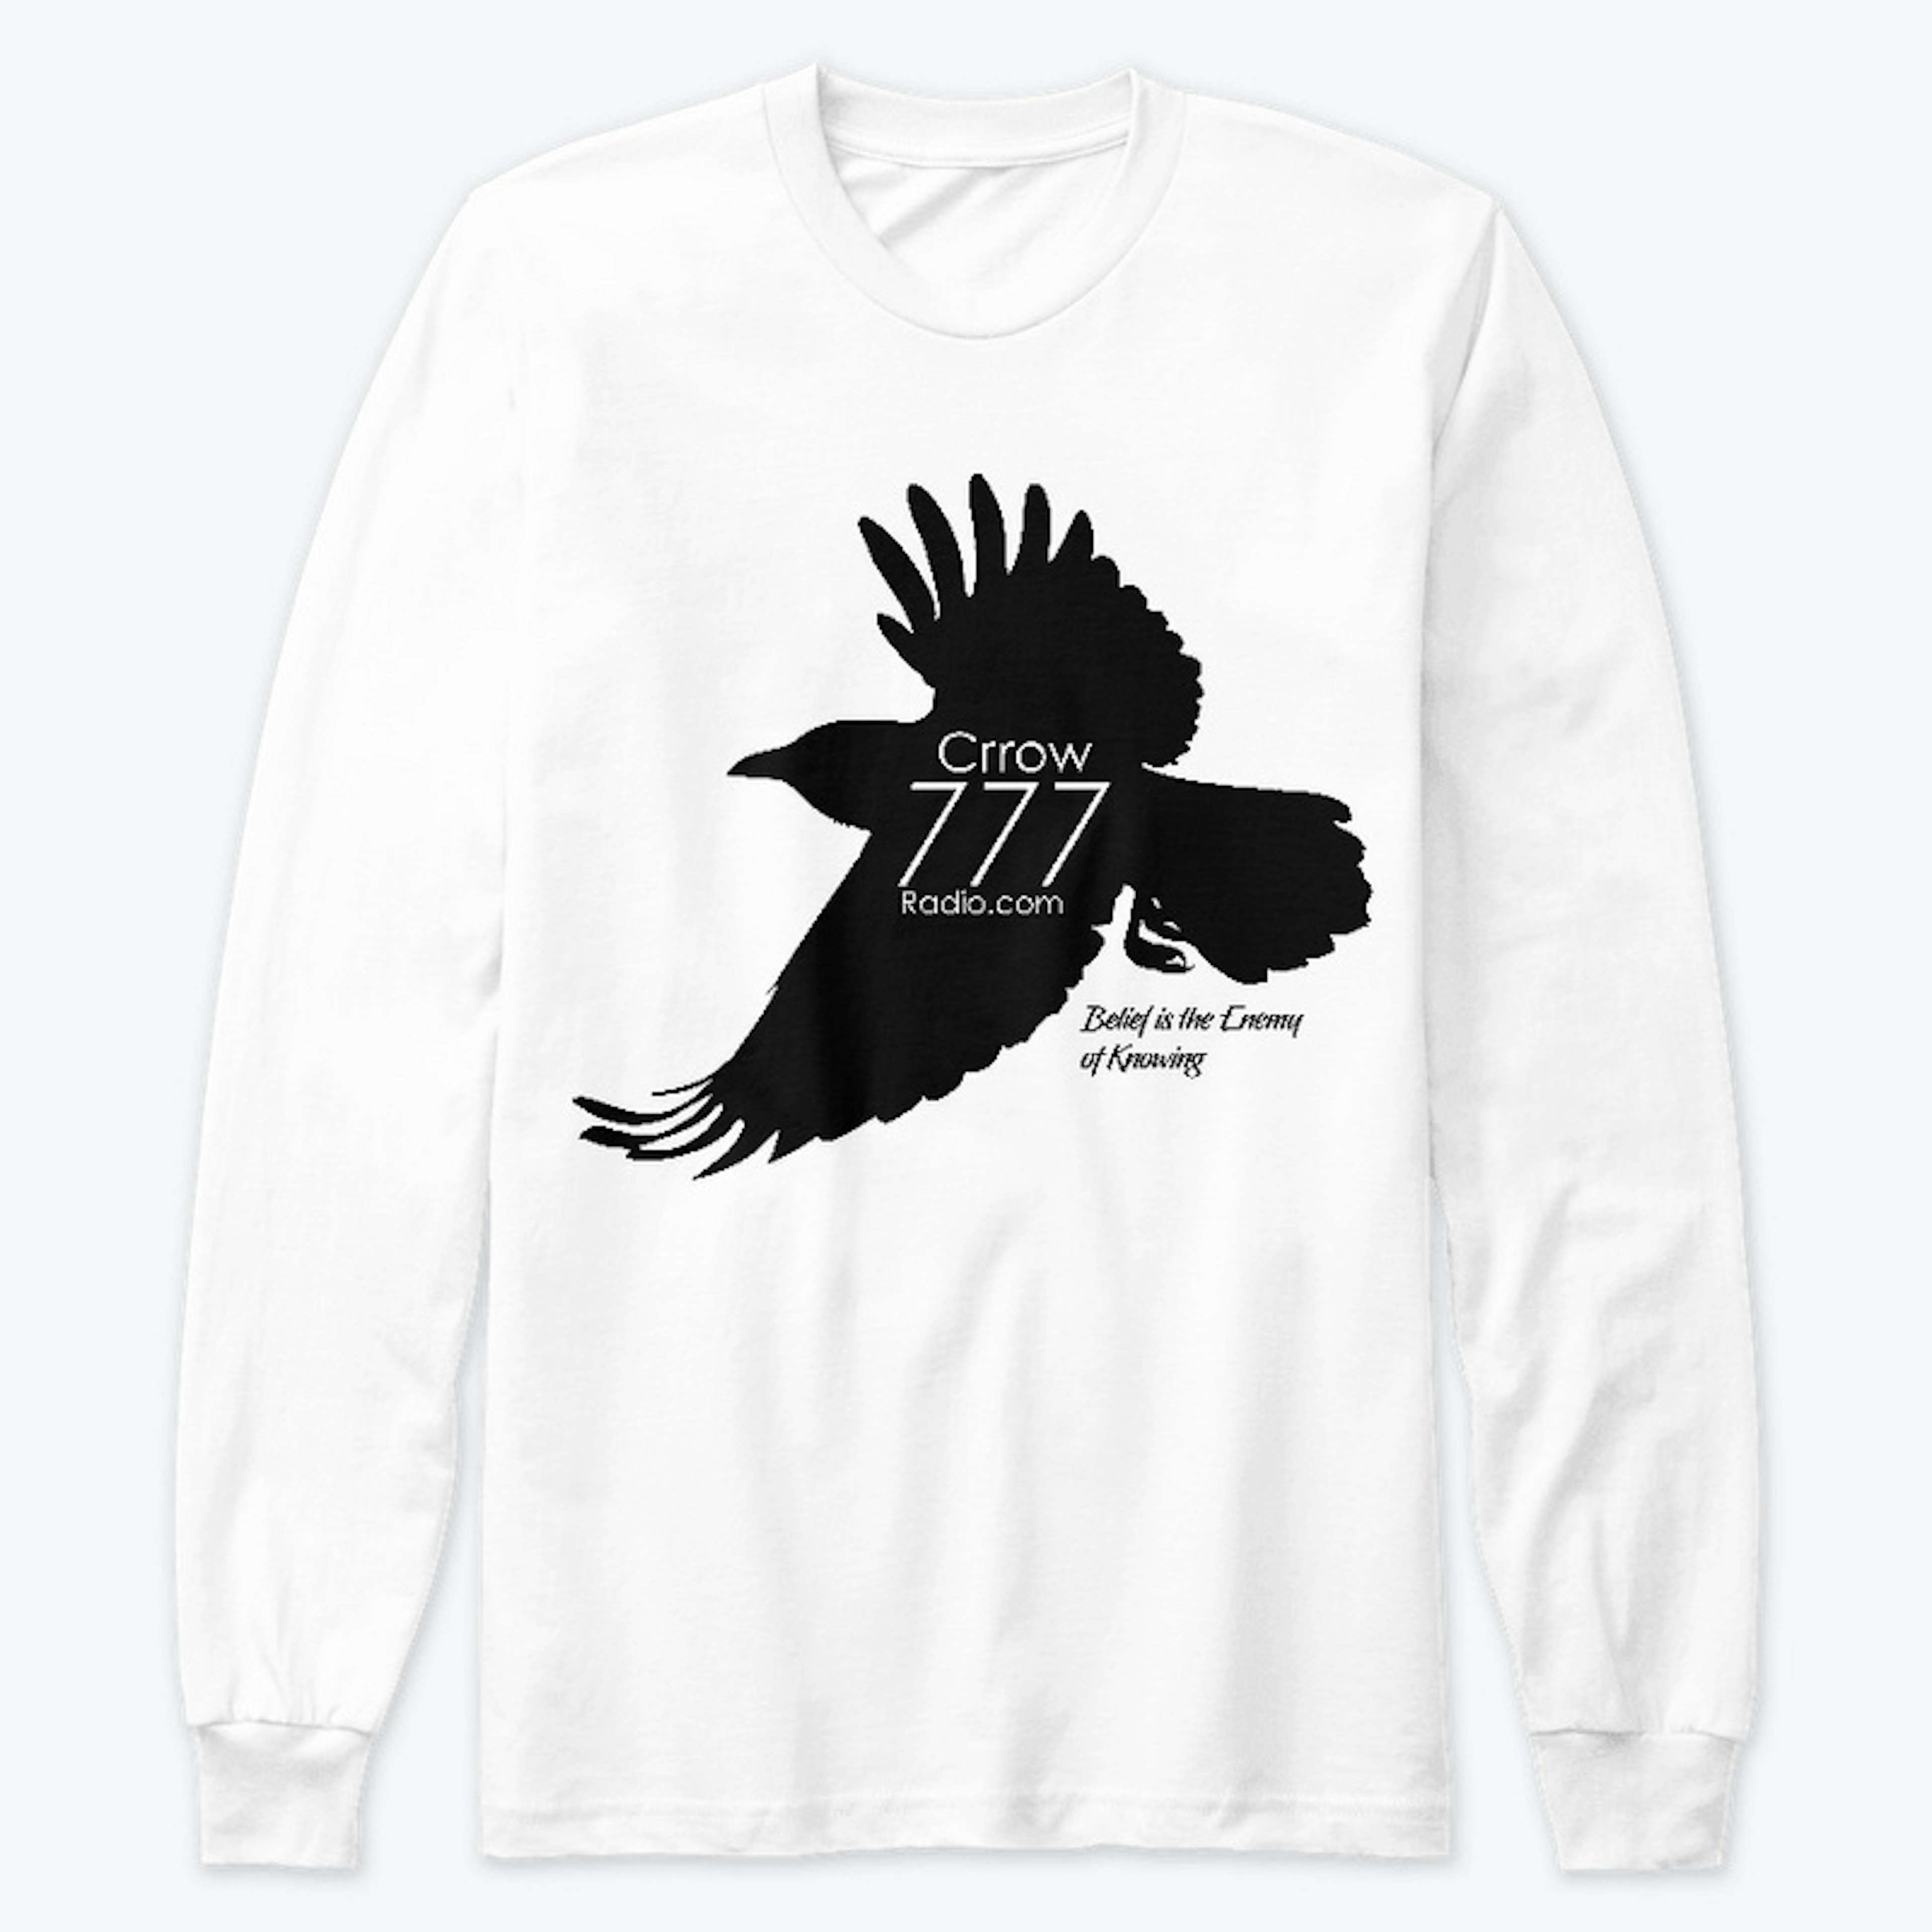 Crrow777 Long-sleeve Design 1 for Subs